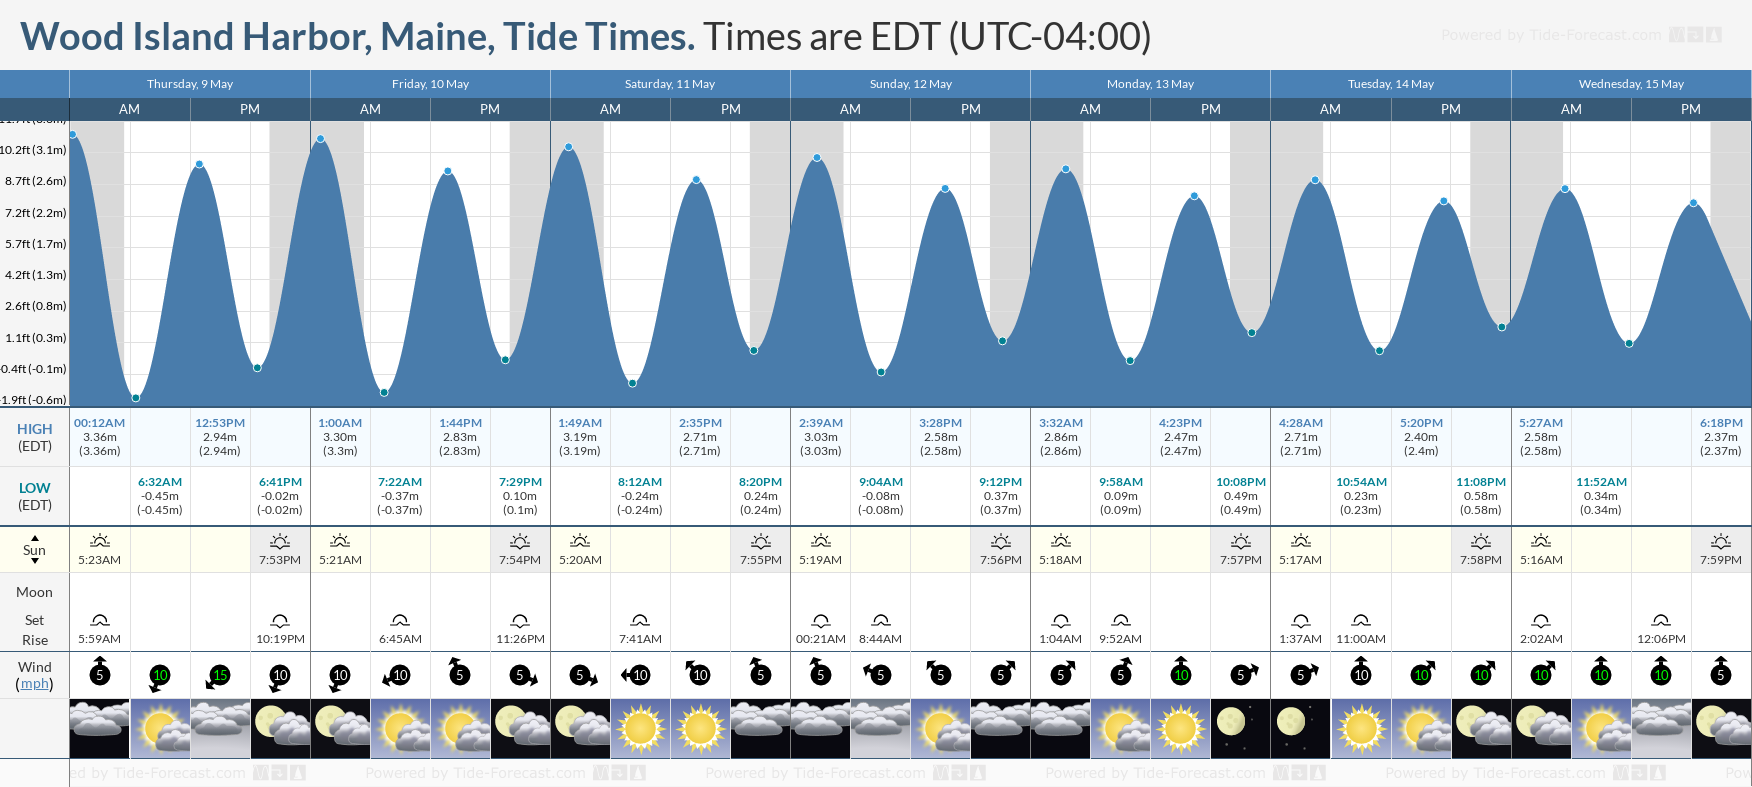 Wood Island Harbor, Maine Tide Chart including high and low tide tide times for the next 7 days